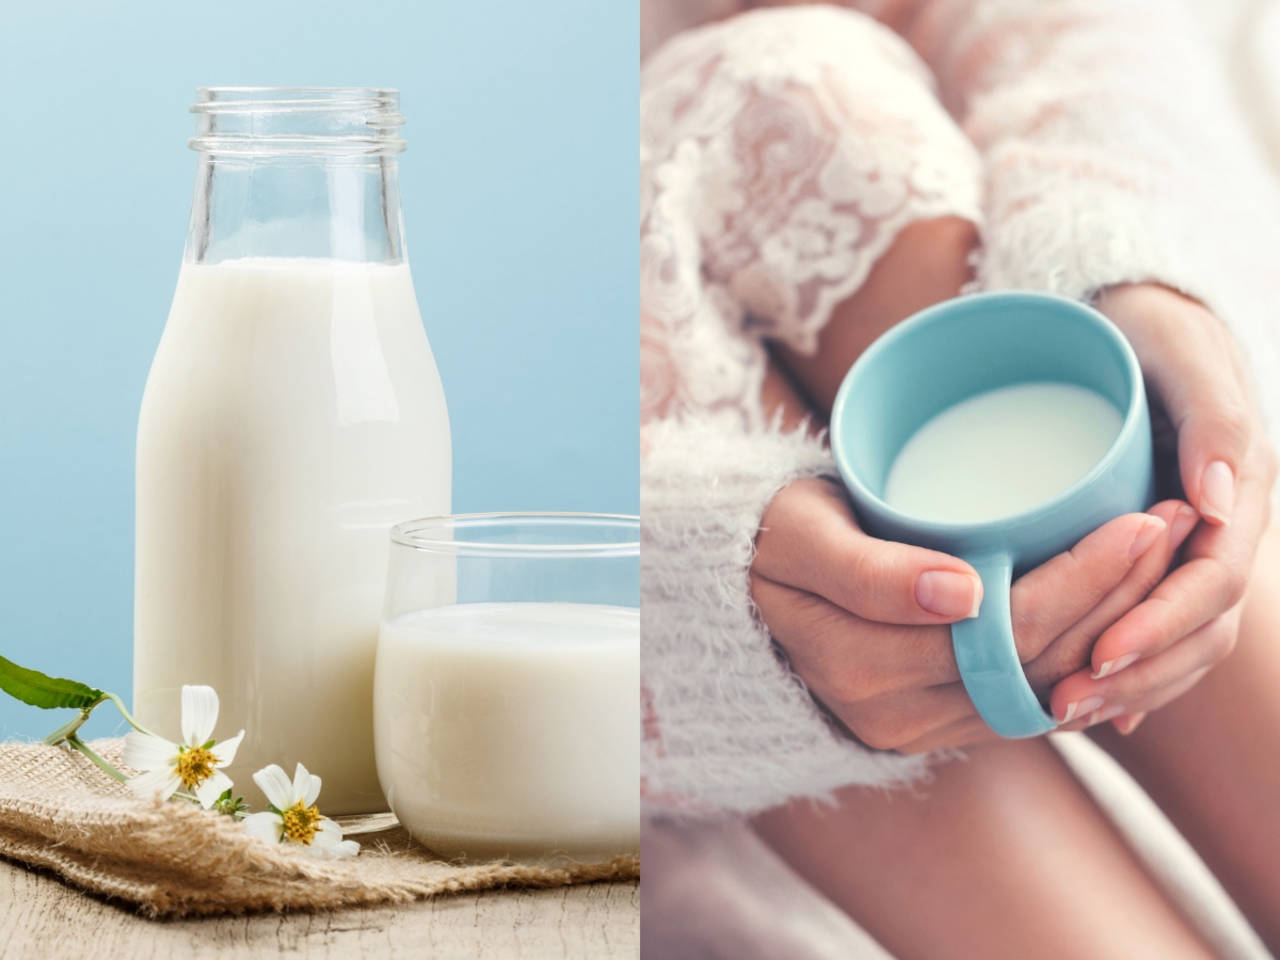 Hot milk or cold milk? Which is better? image